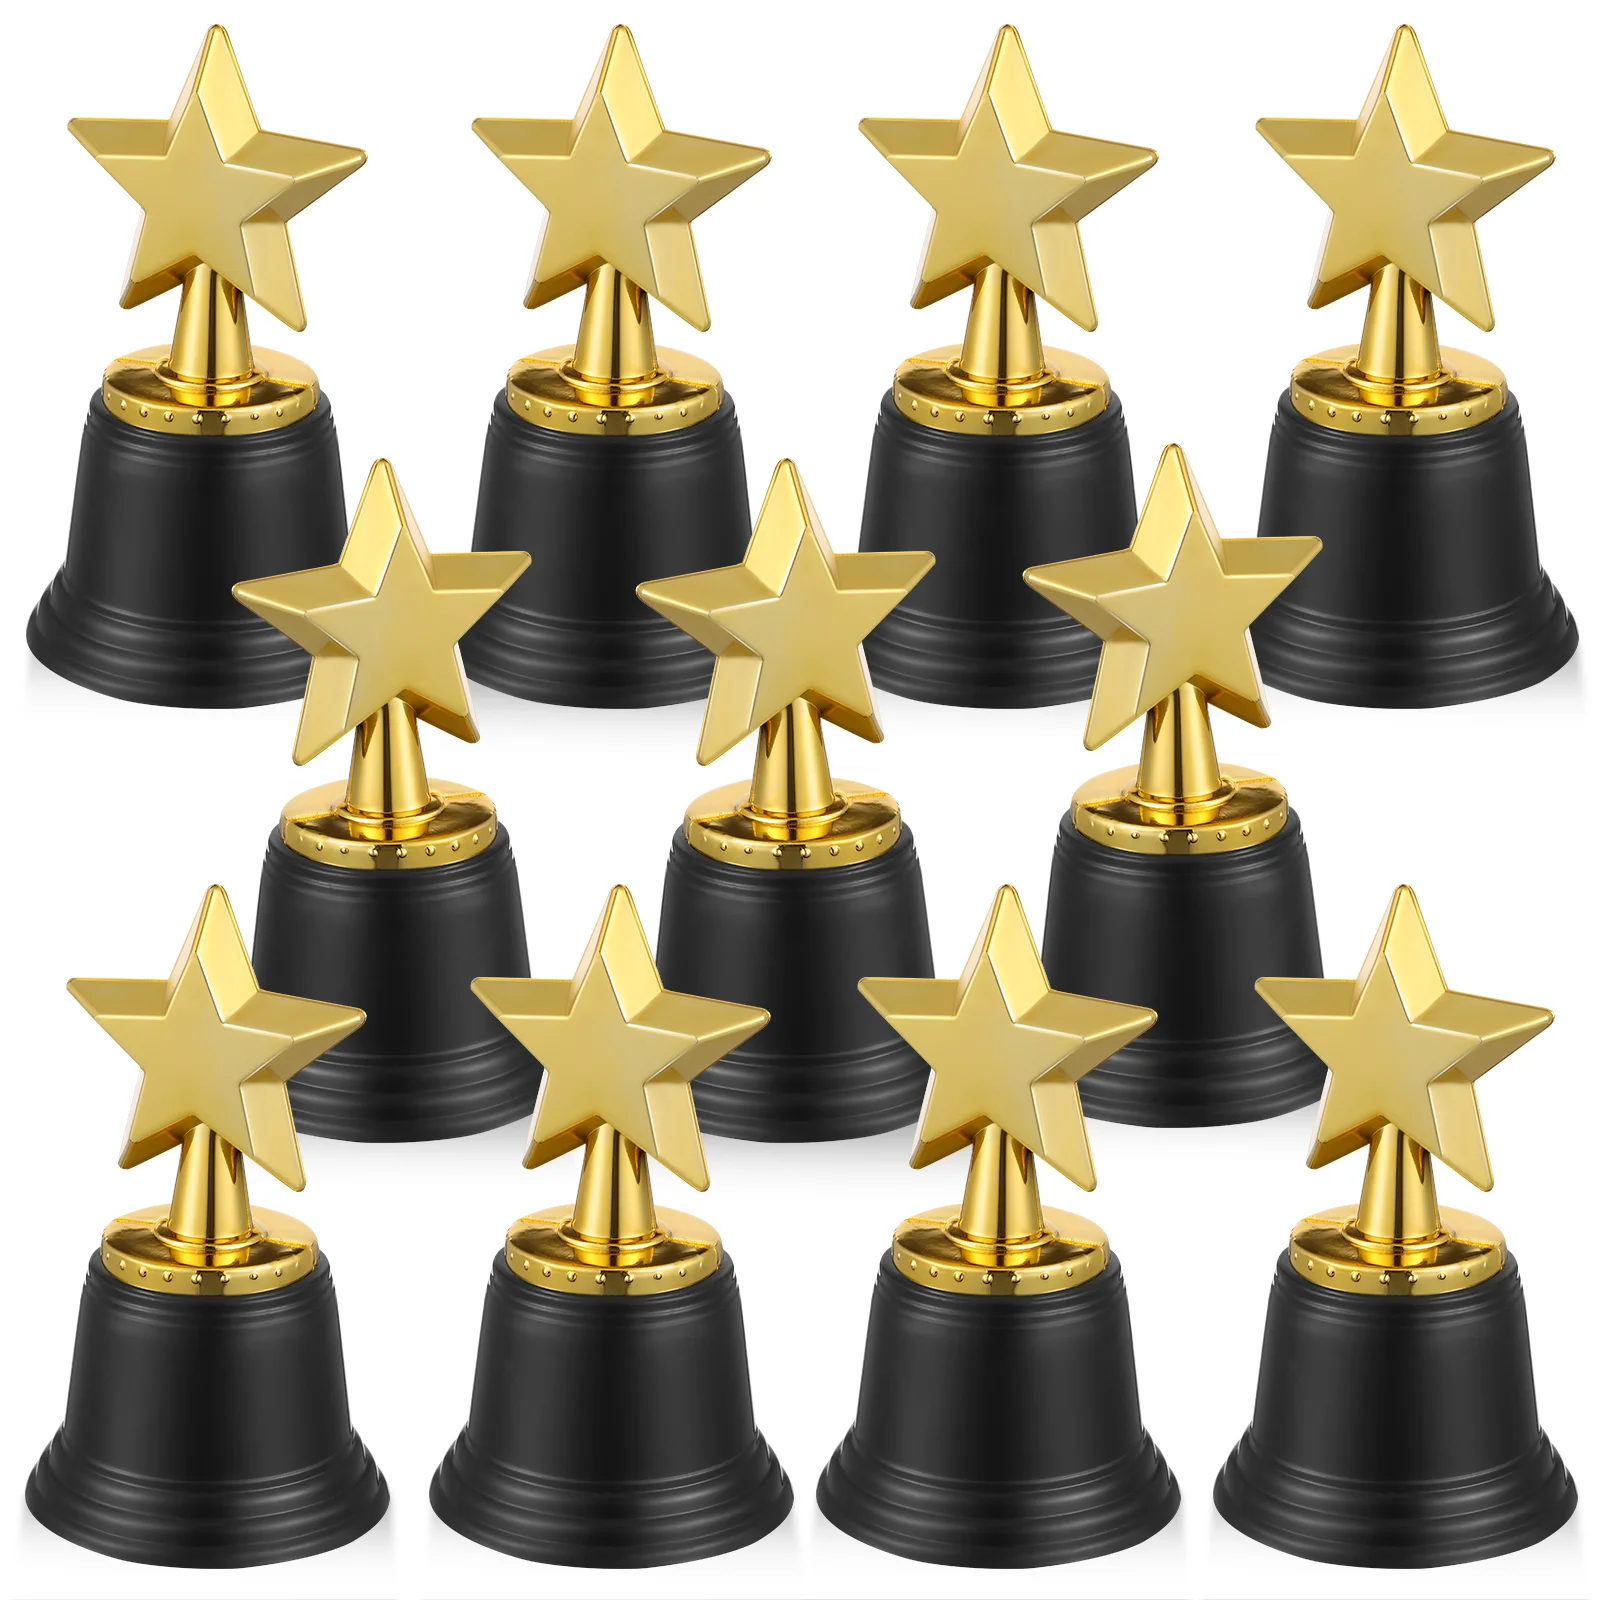 Trophy Kids Award Trophies Party Star Awards Five Cup Point Mini Sports Prize Plastic Gold Cups Decor Toy Winning Medals Trophie trophy kids award trophies party star awards five cup point mini sports prize plastic gold cups decor toy winning medals trophie